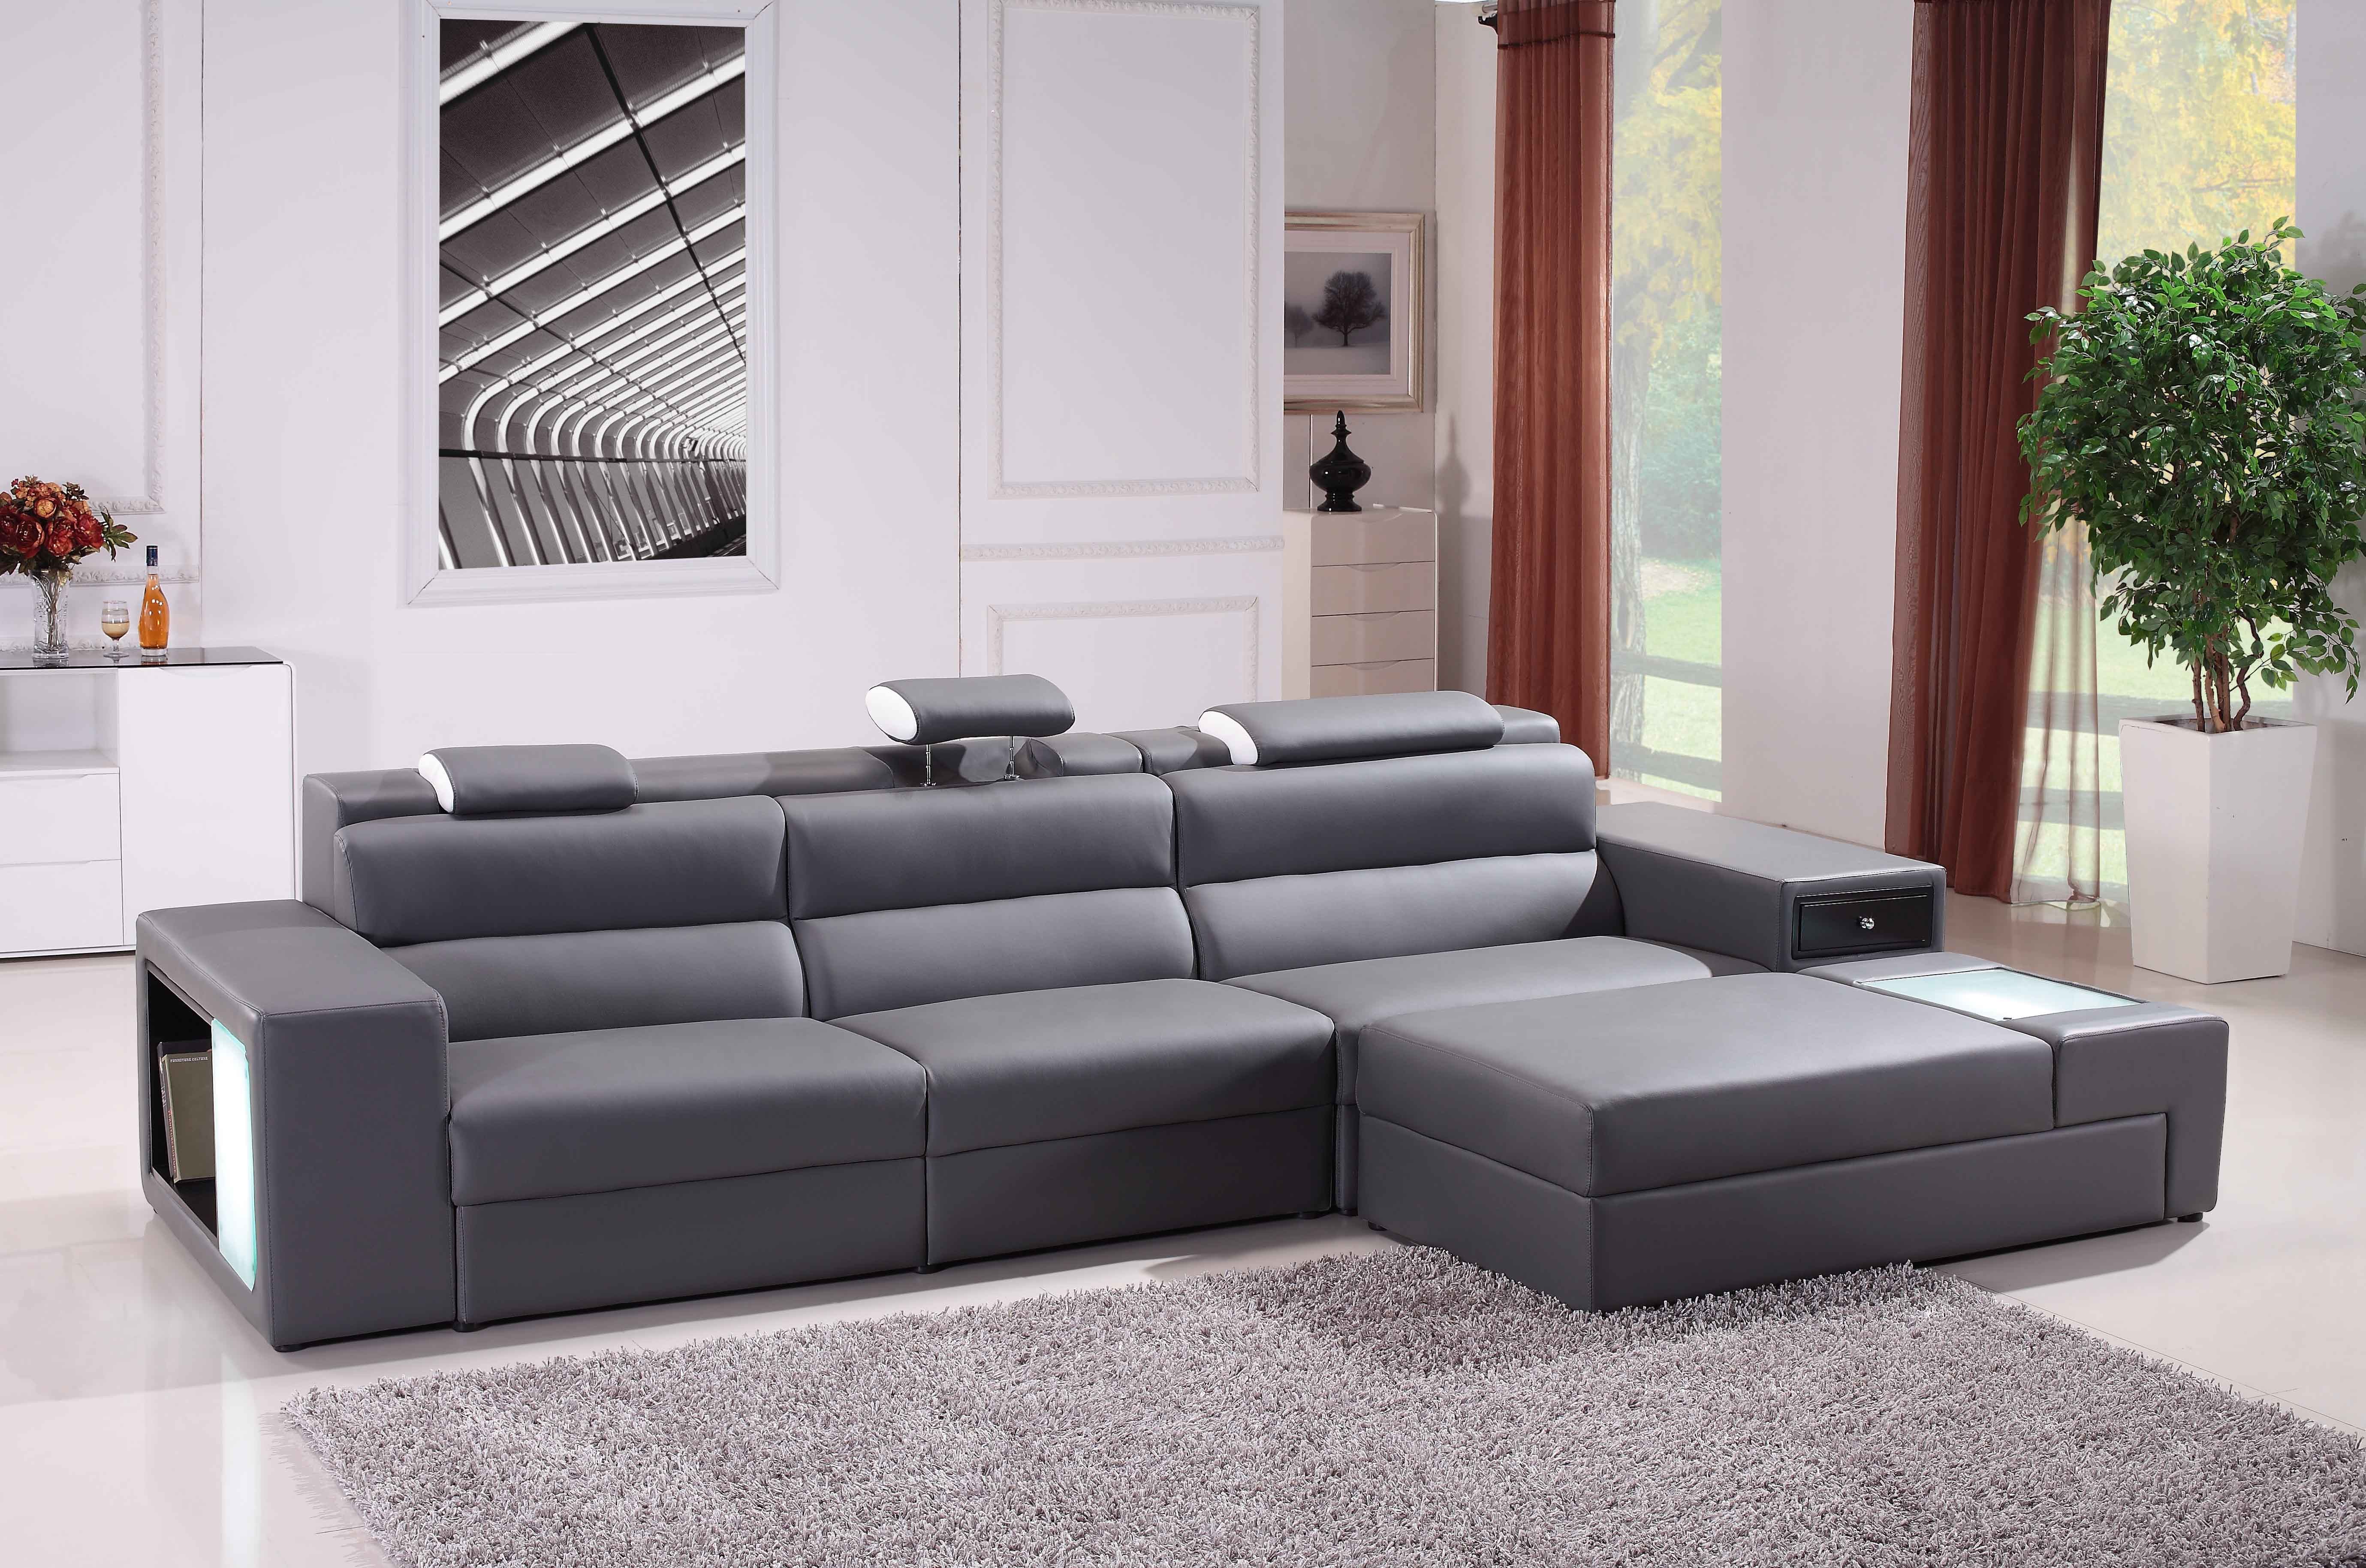 Gray Leather Sleeper Sectional Sofa With Shelf Placed On The White Floor  Plus Gray Fur Rug